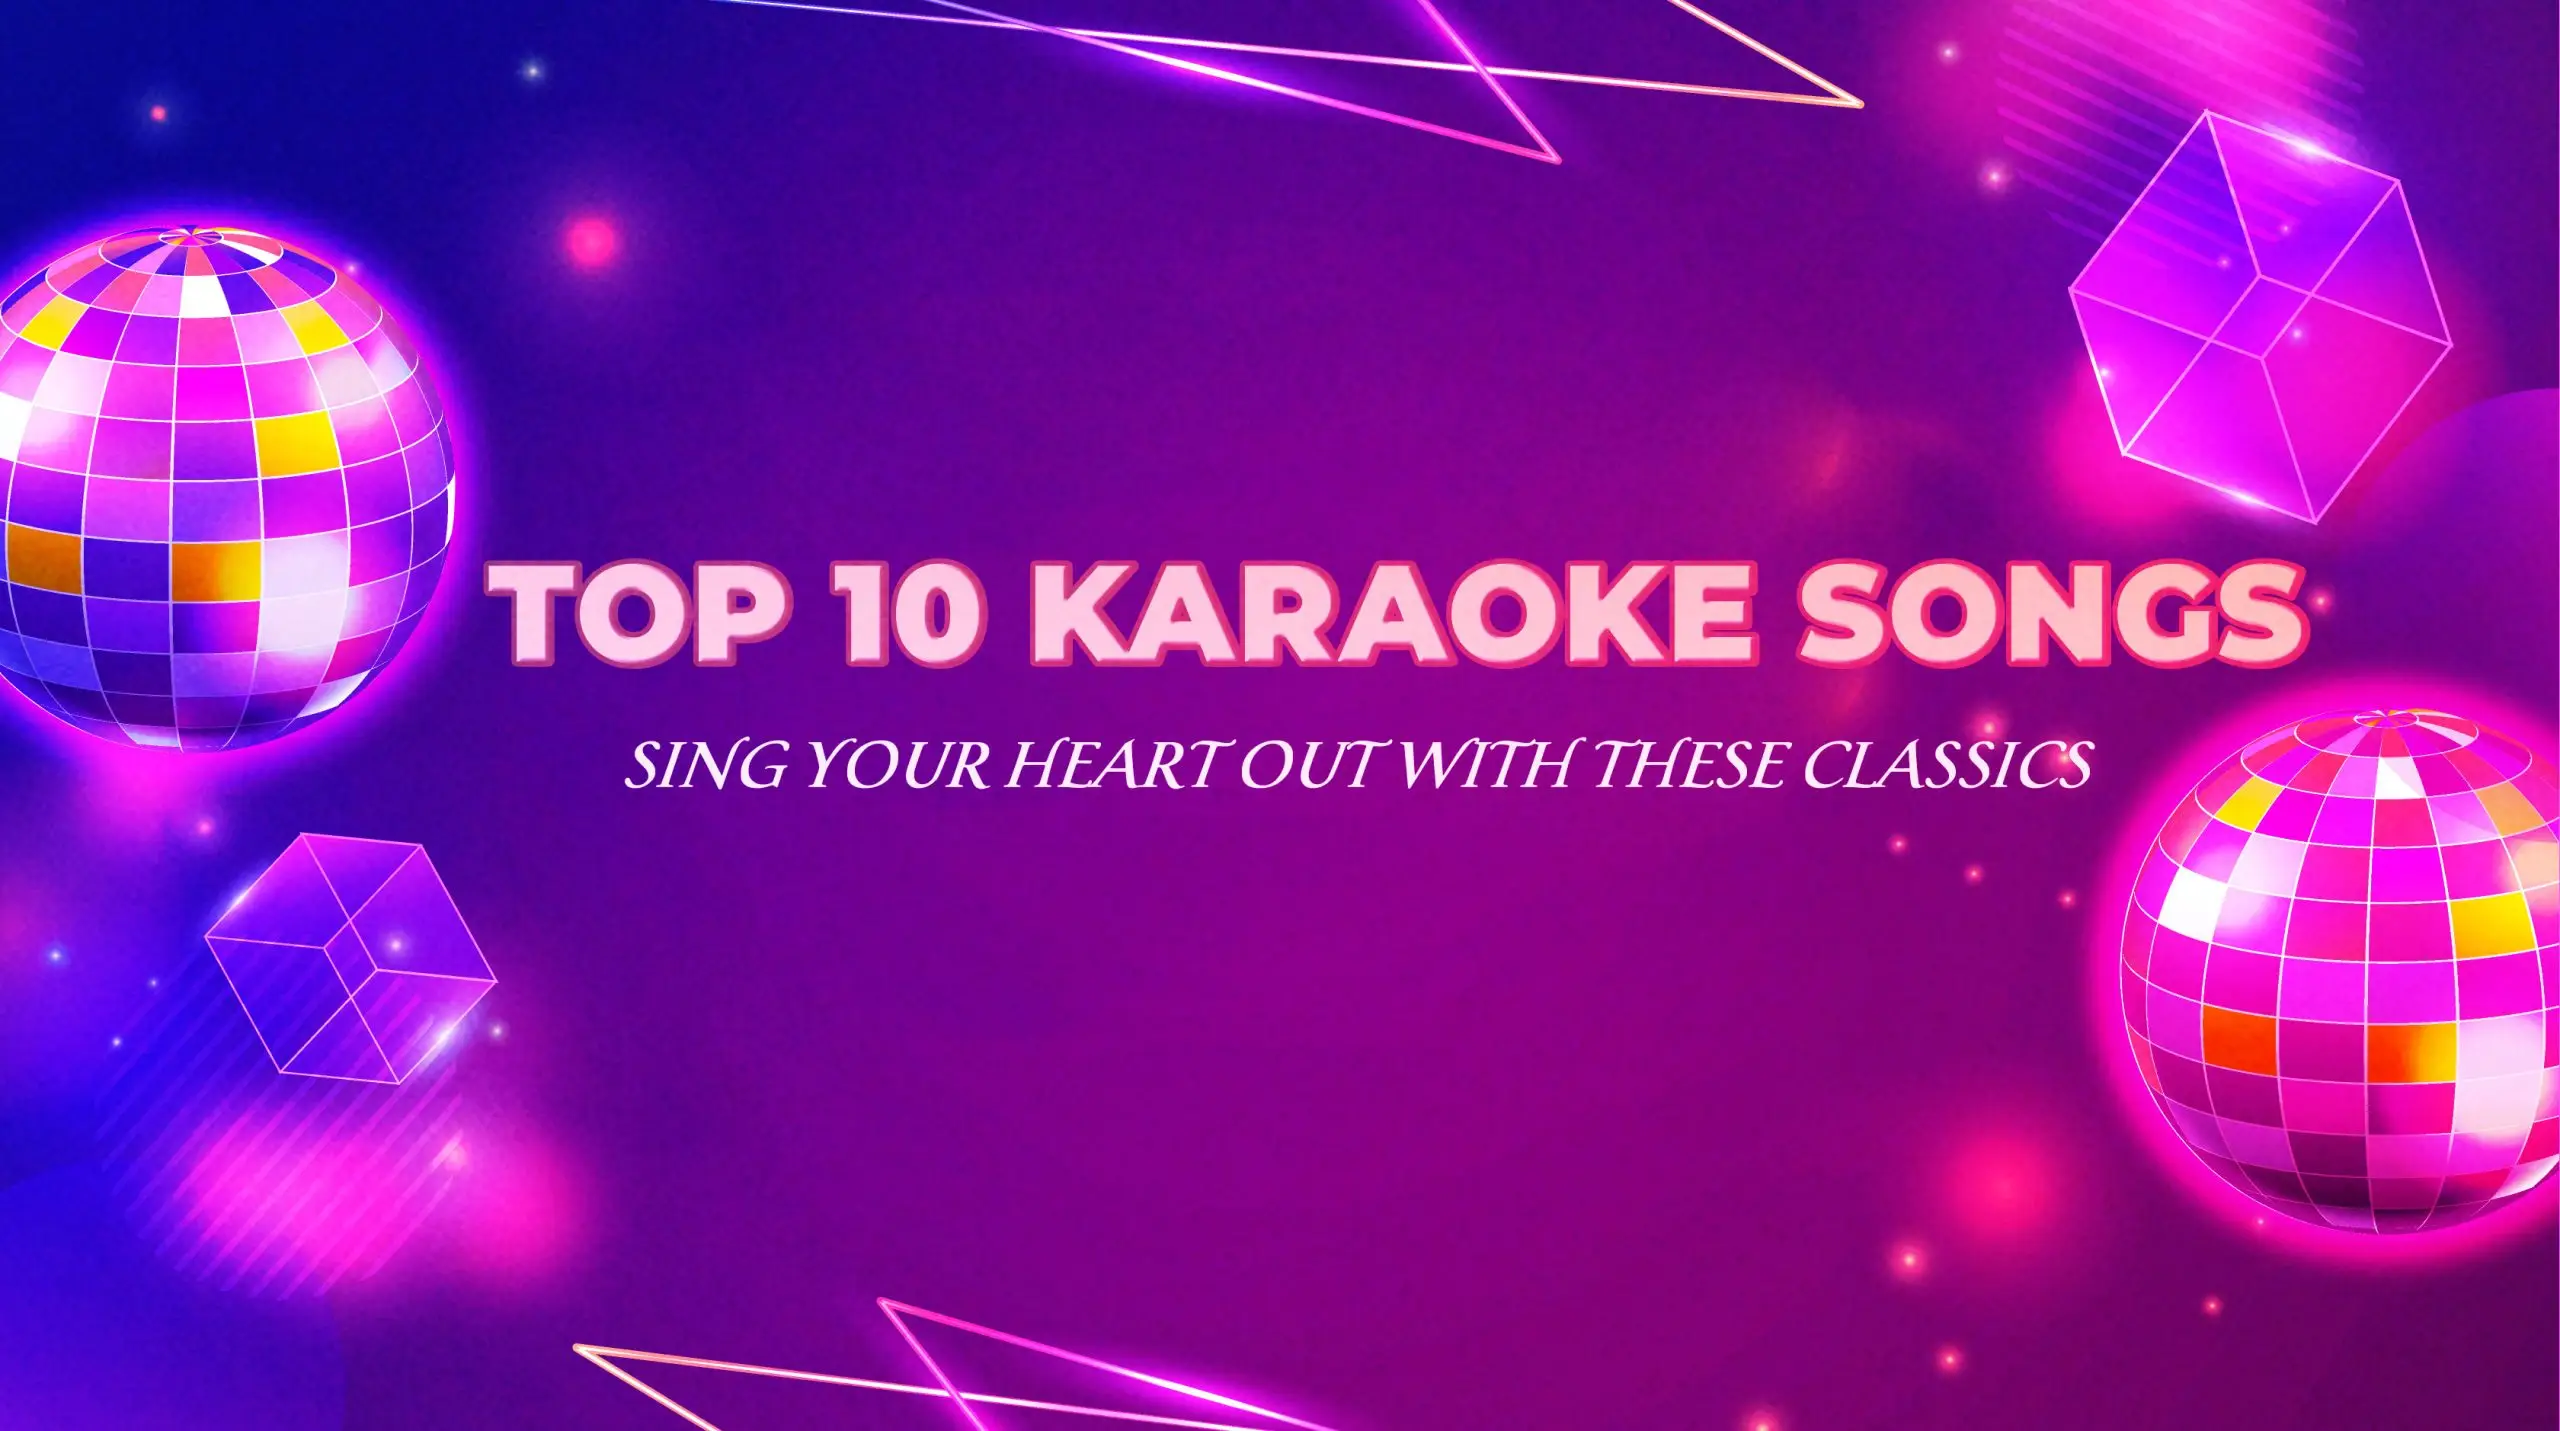 Top 10 Karaoke Songs: Sing Your Heart Out with These Classics